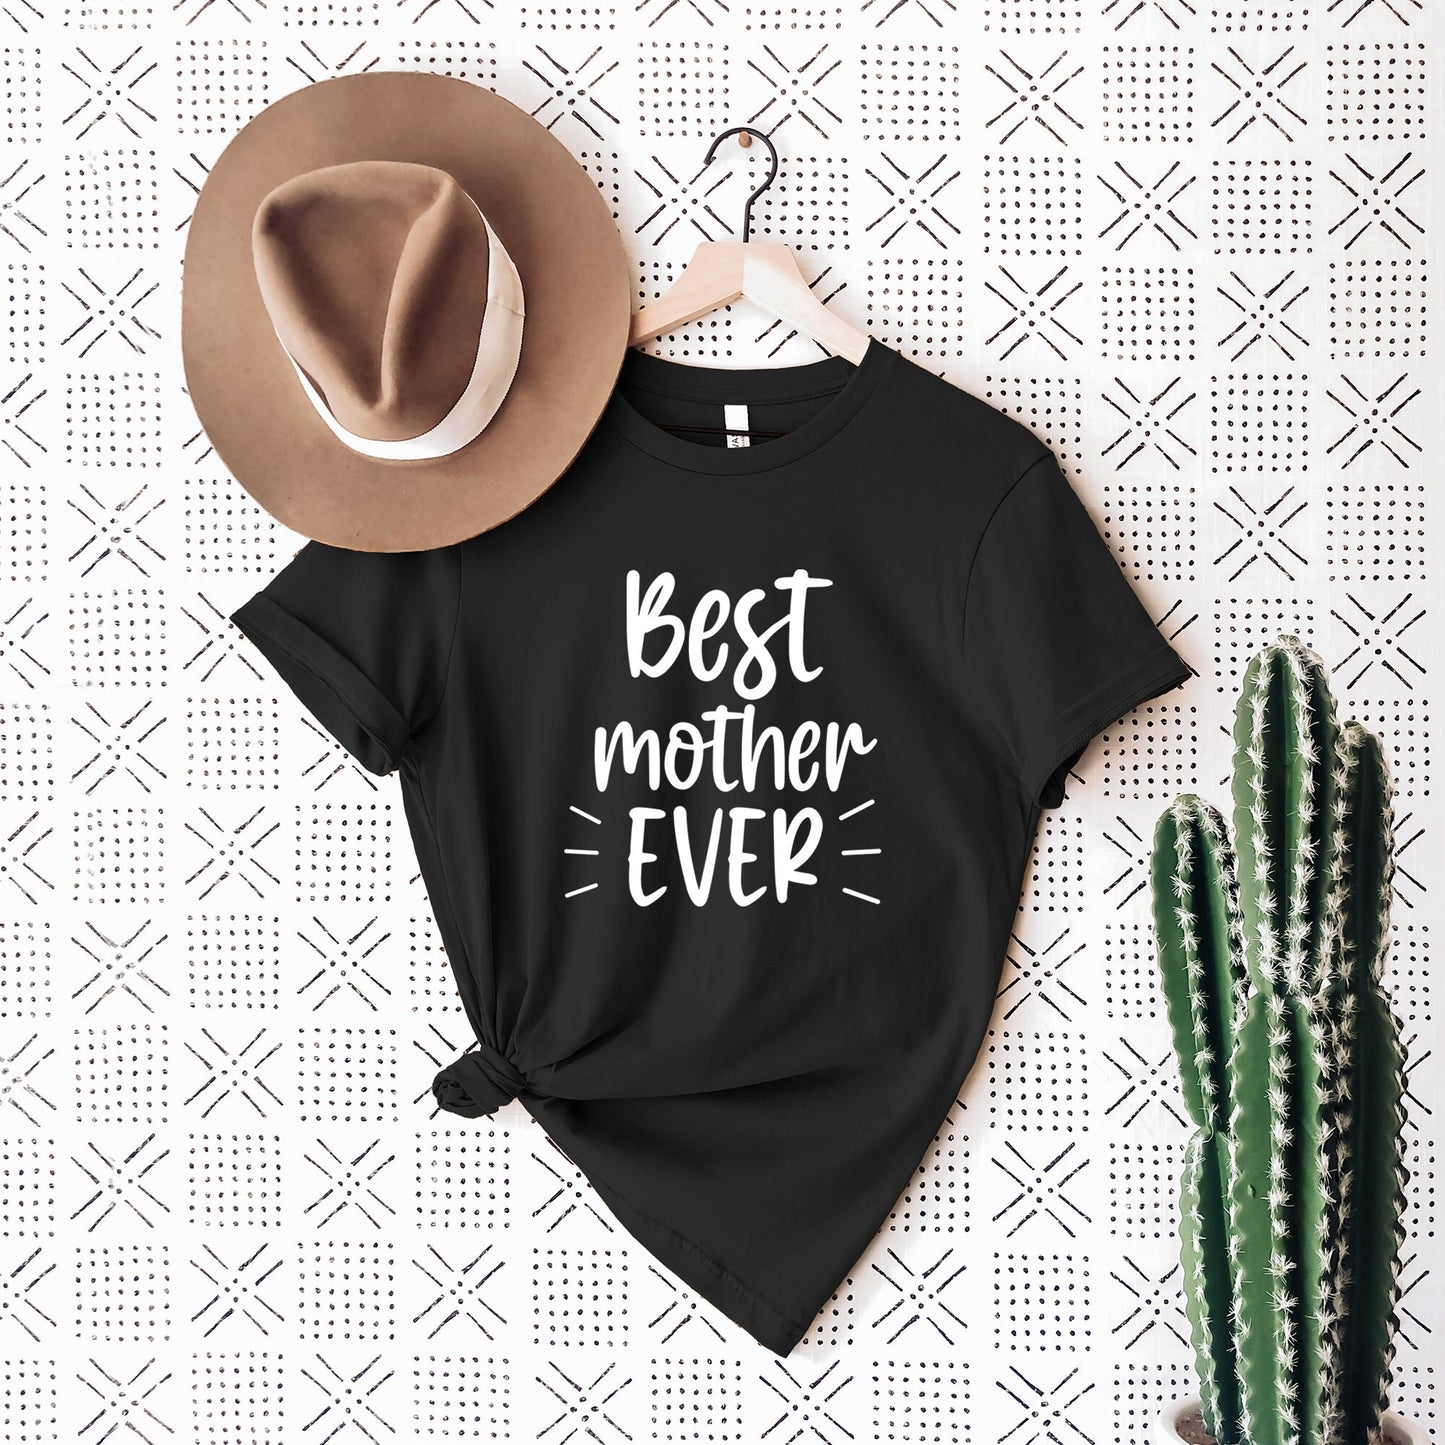 Mother's Day Shirt, Mom Shirts, Mom-life Shirt, Shirts for Moms, Gift for Her, Cool Mom Shirts, Shirts for Moms